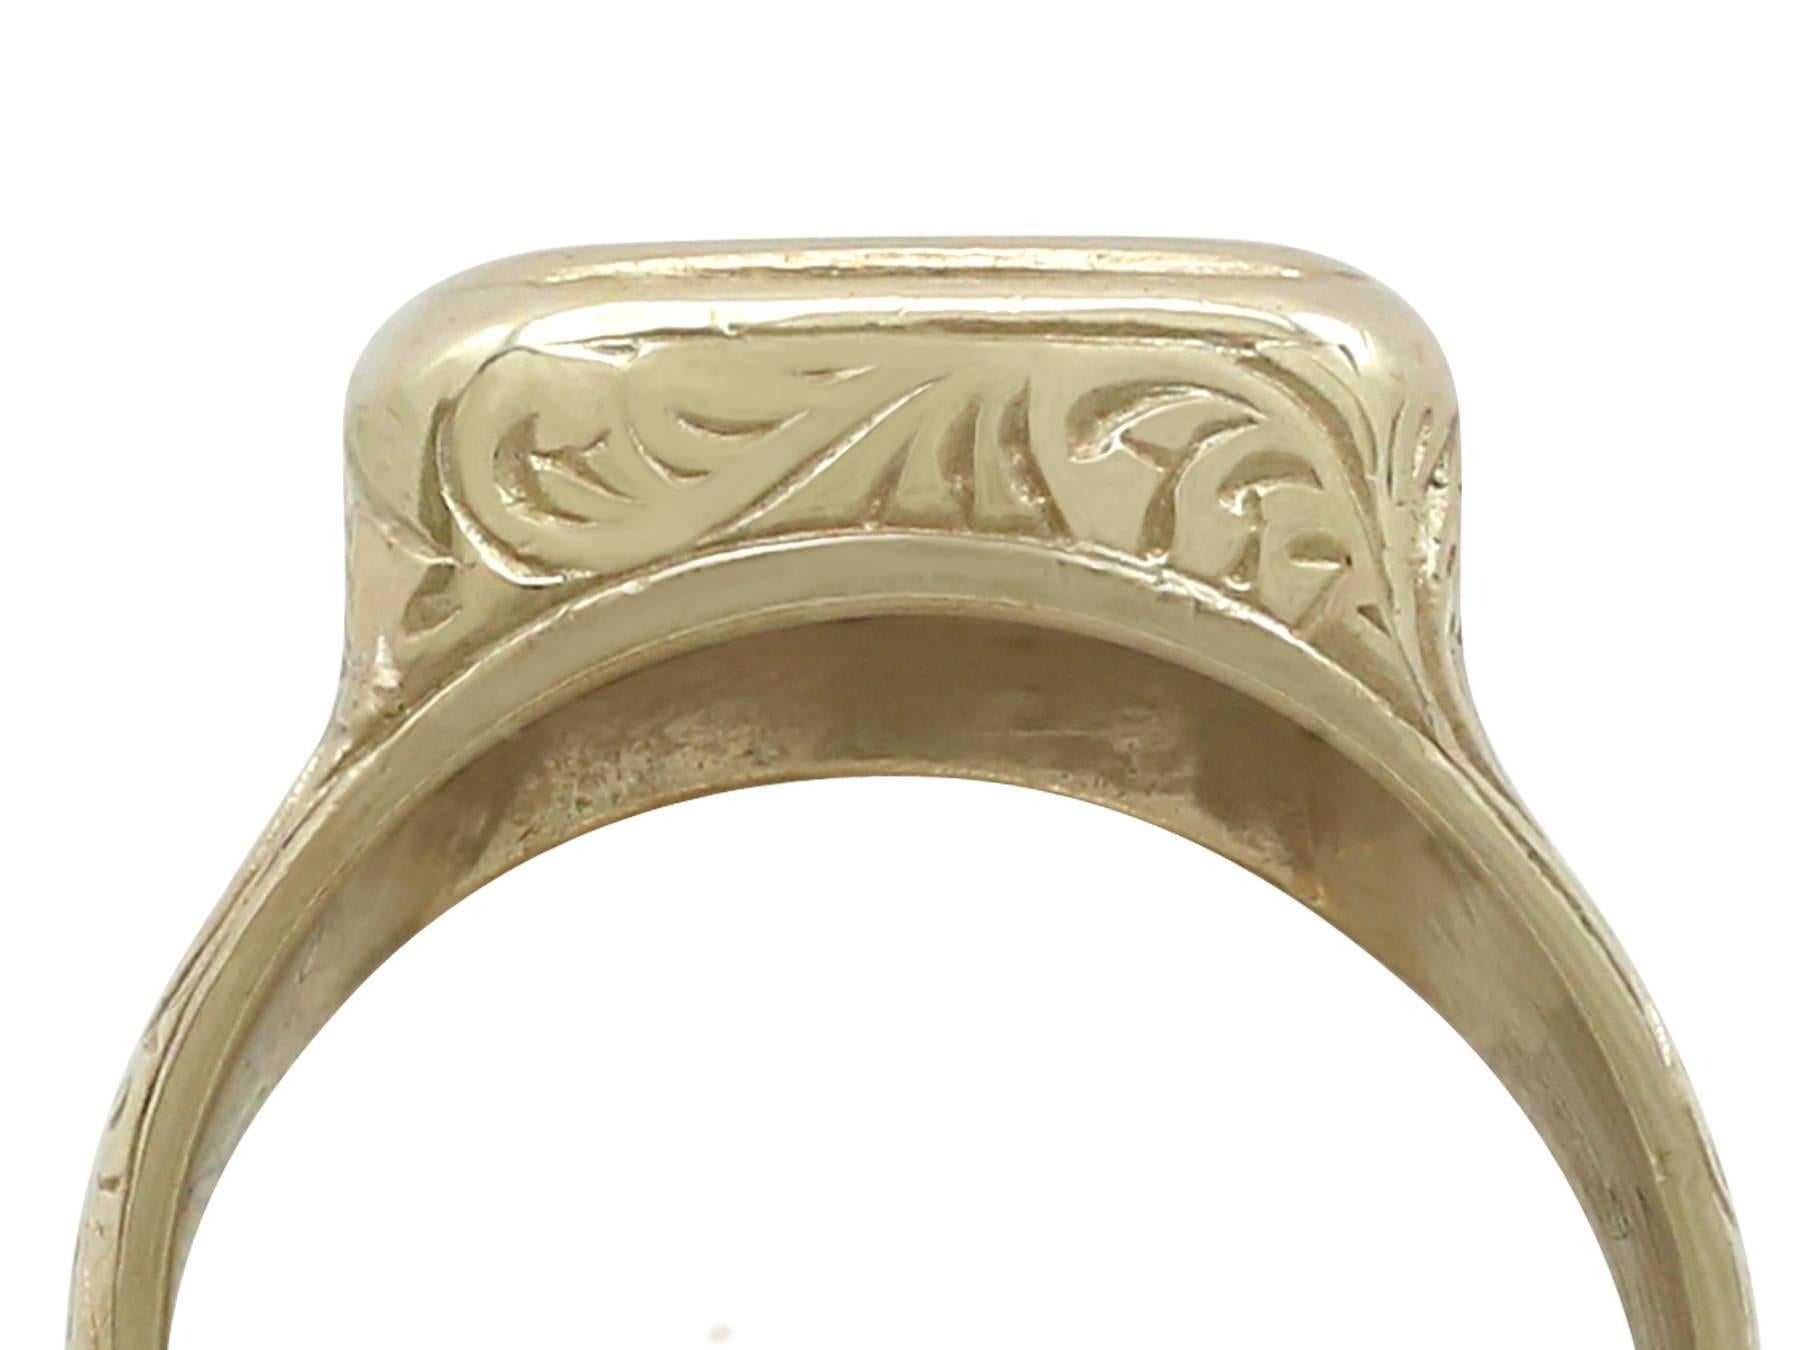 An impressive antique American 9 carat yellow gold signet ring; part of our diverse antique jewellery and estate jewelry collections.

This fine and impressive American signet ring has been crafted in 9 ct yellow gold.

The rounded rectangular